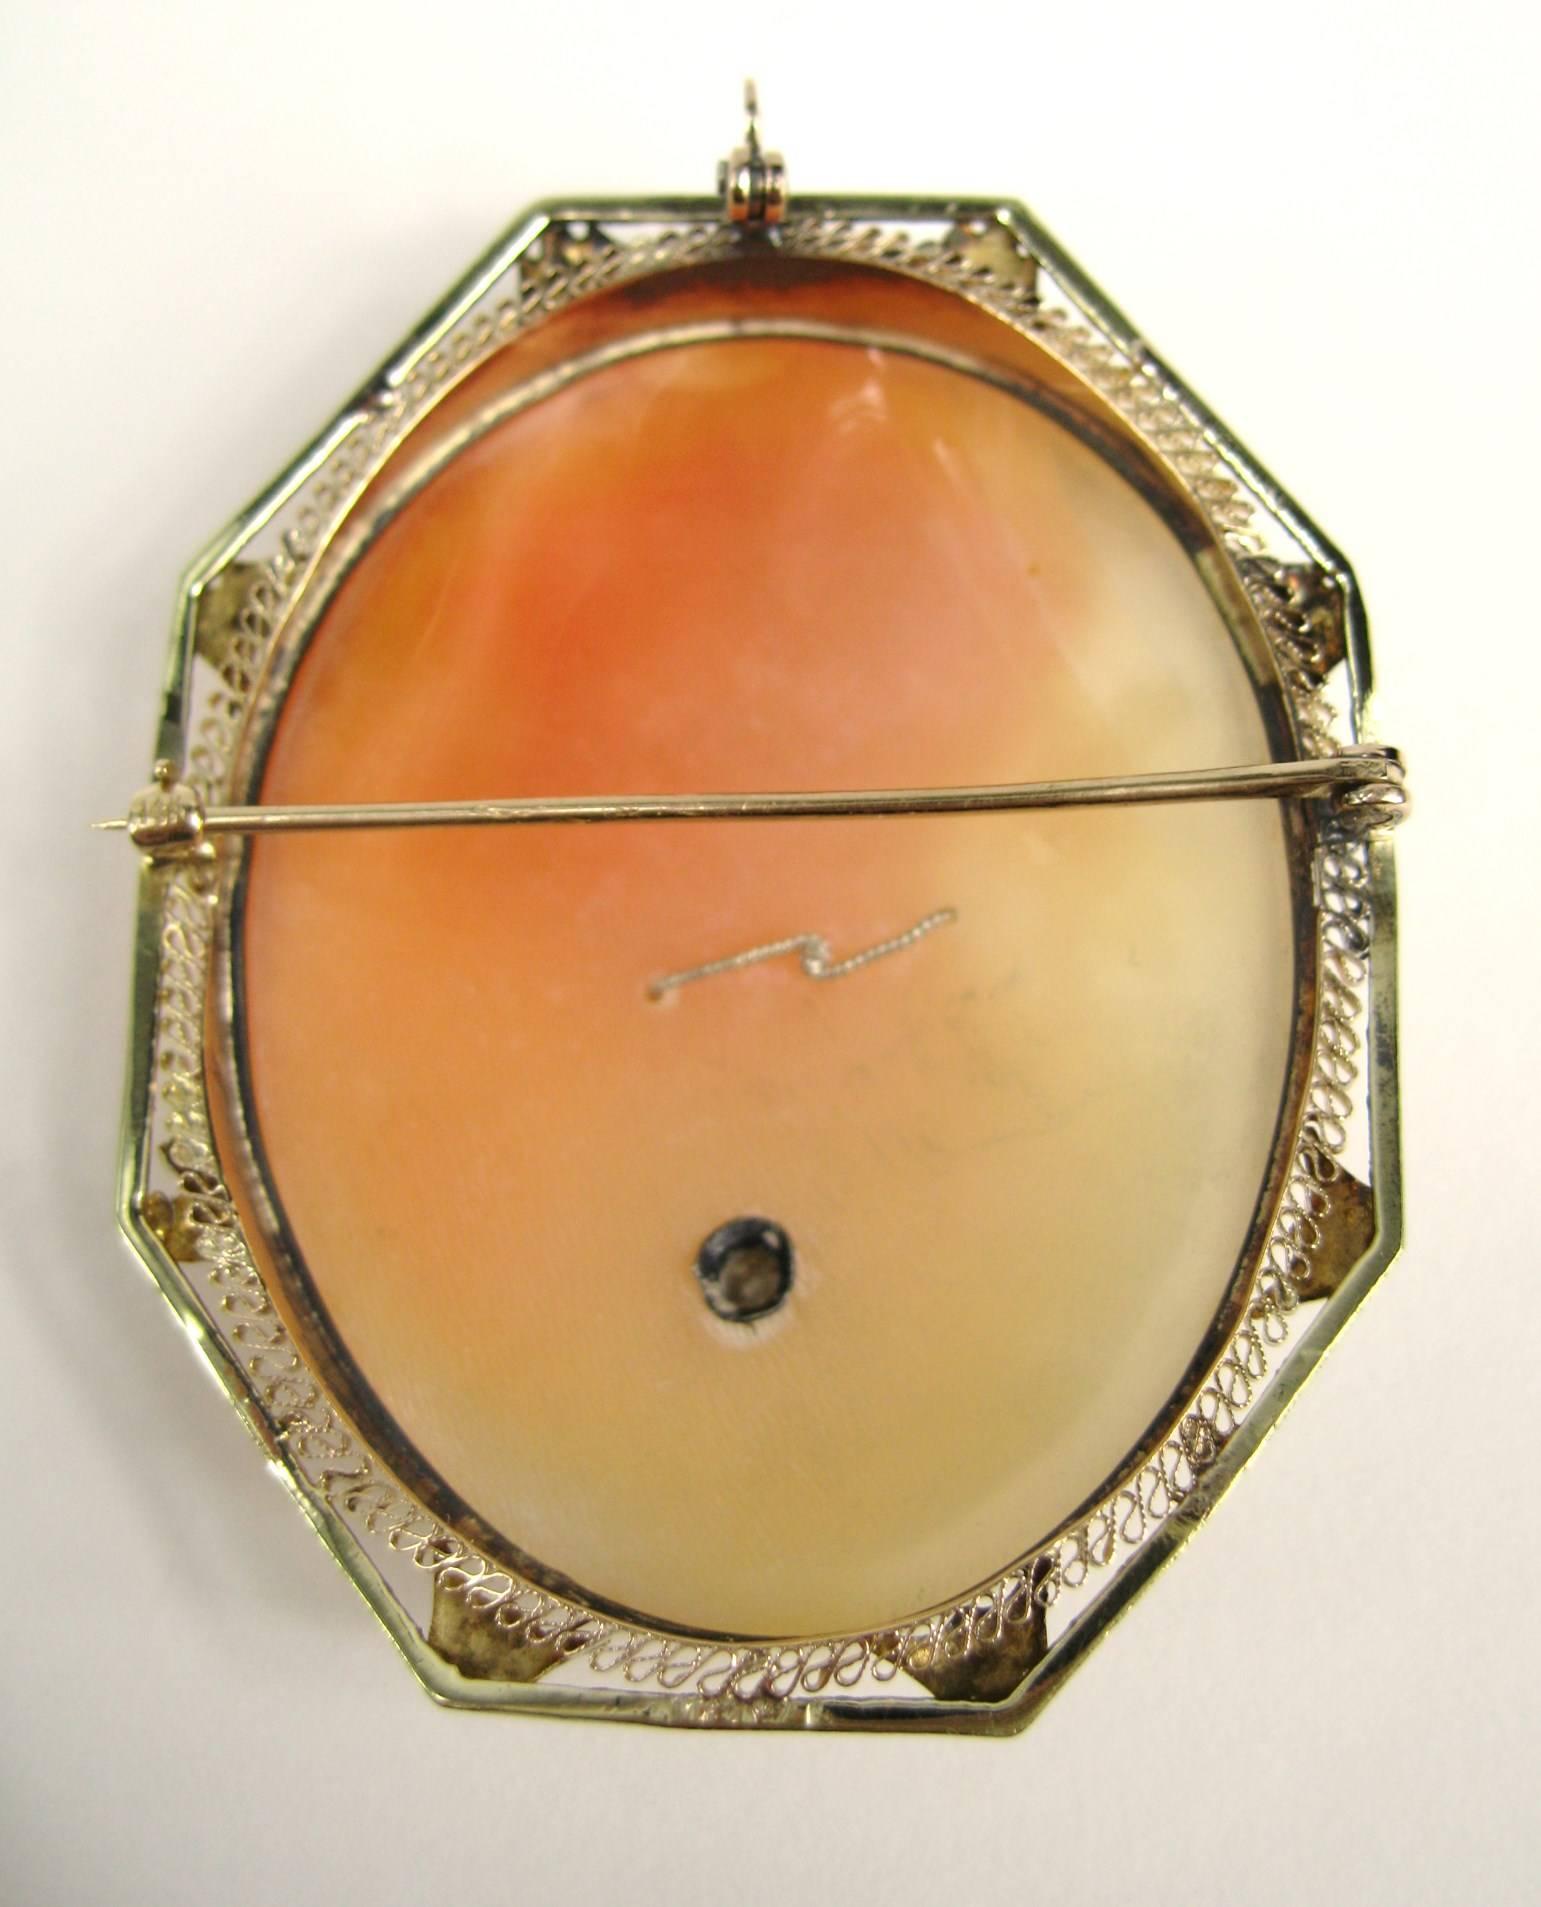 14 Karat Gold Cameo Brooch Diamond Pendant In Good Condition For Sale In Wallkill, NY